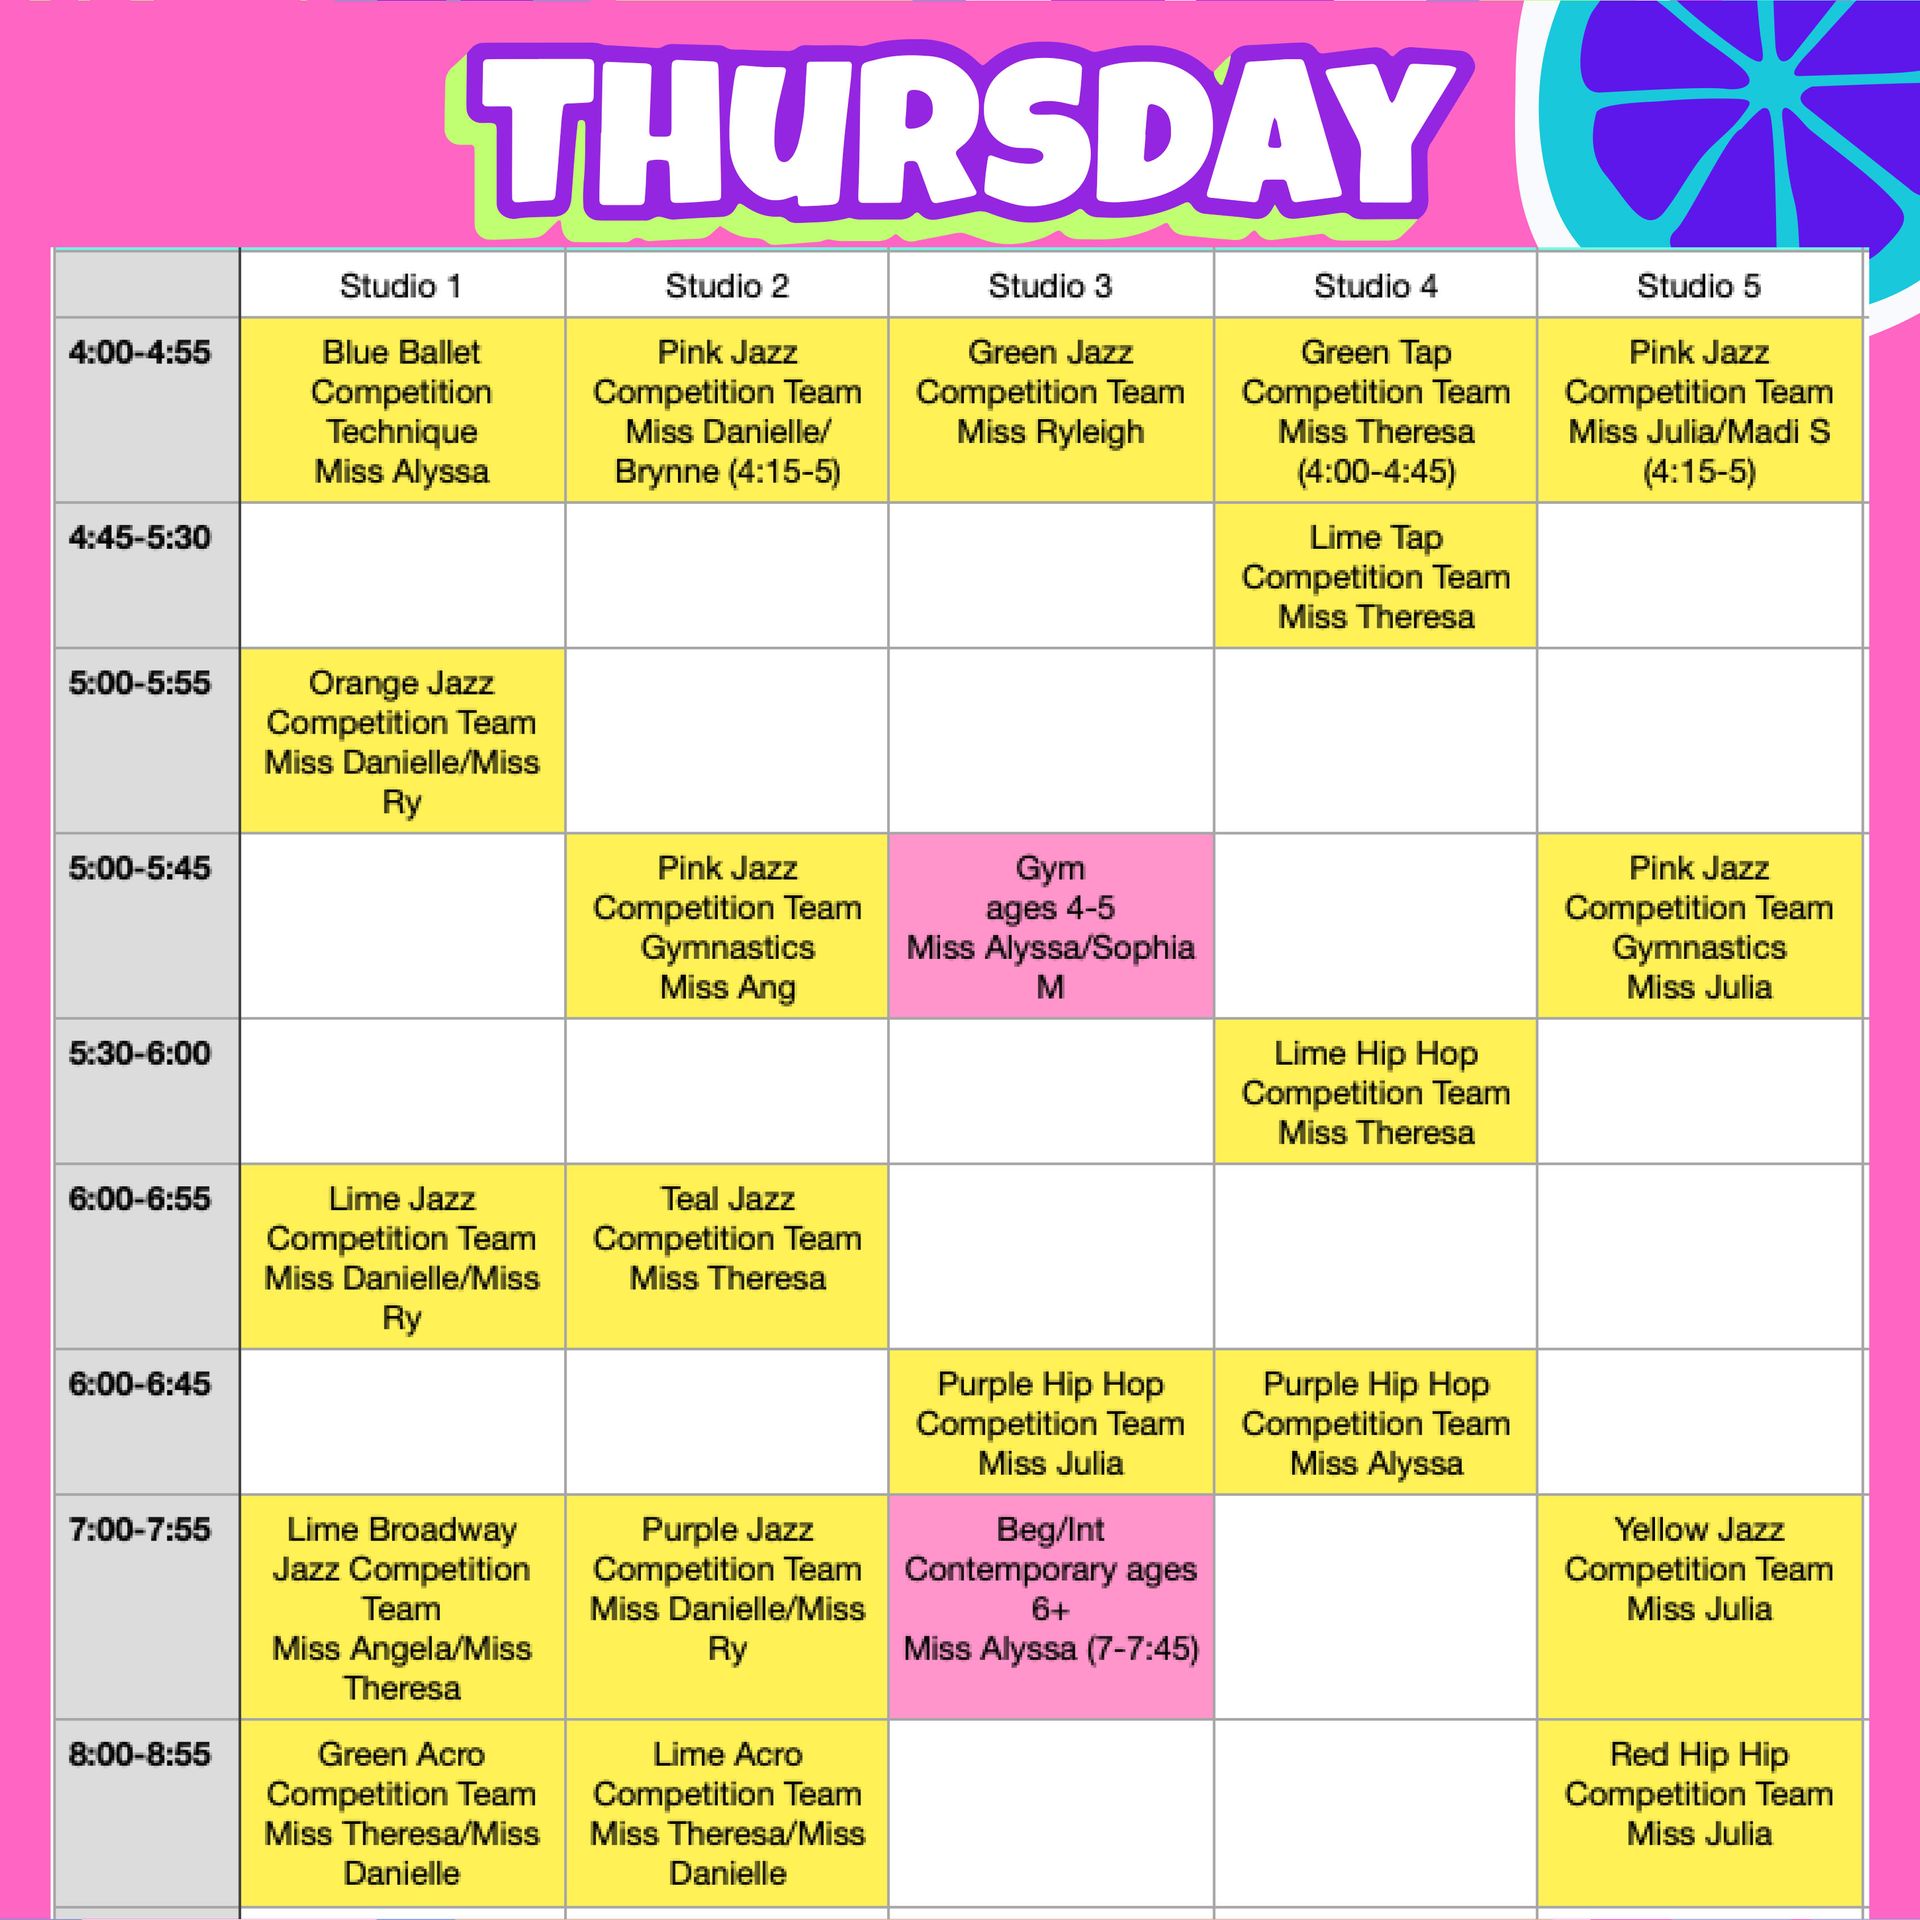 A schedule for Thursday is shown on a pink background